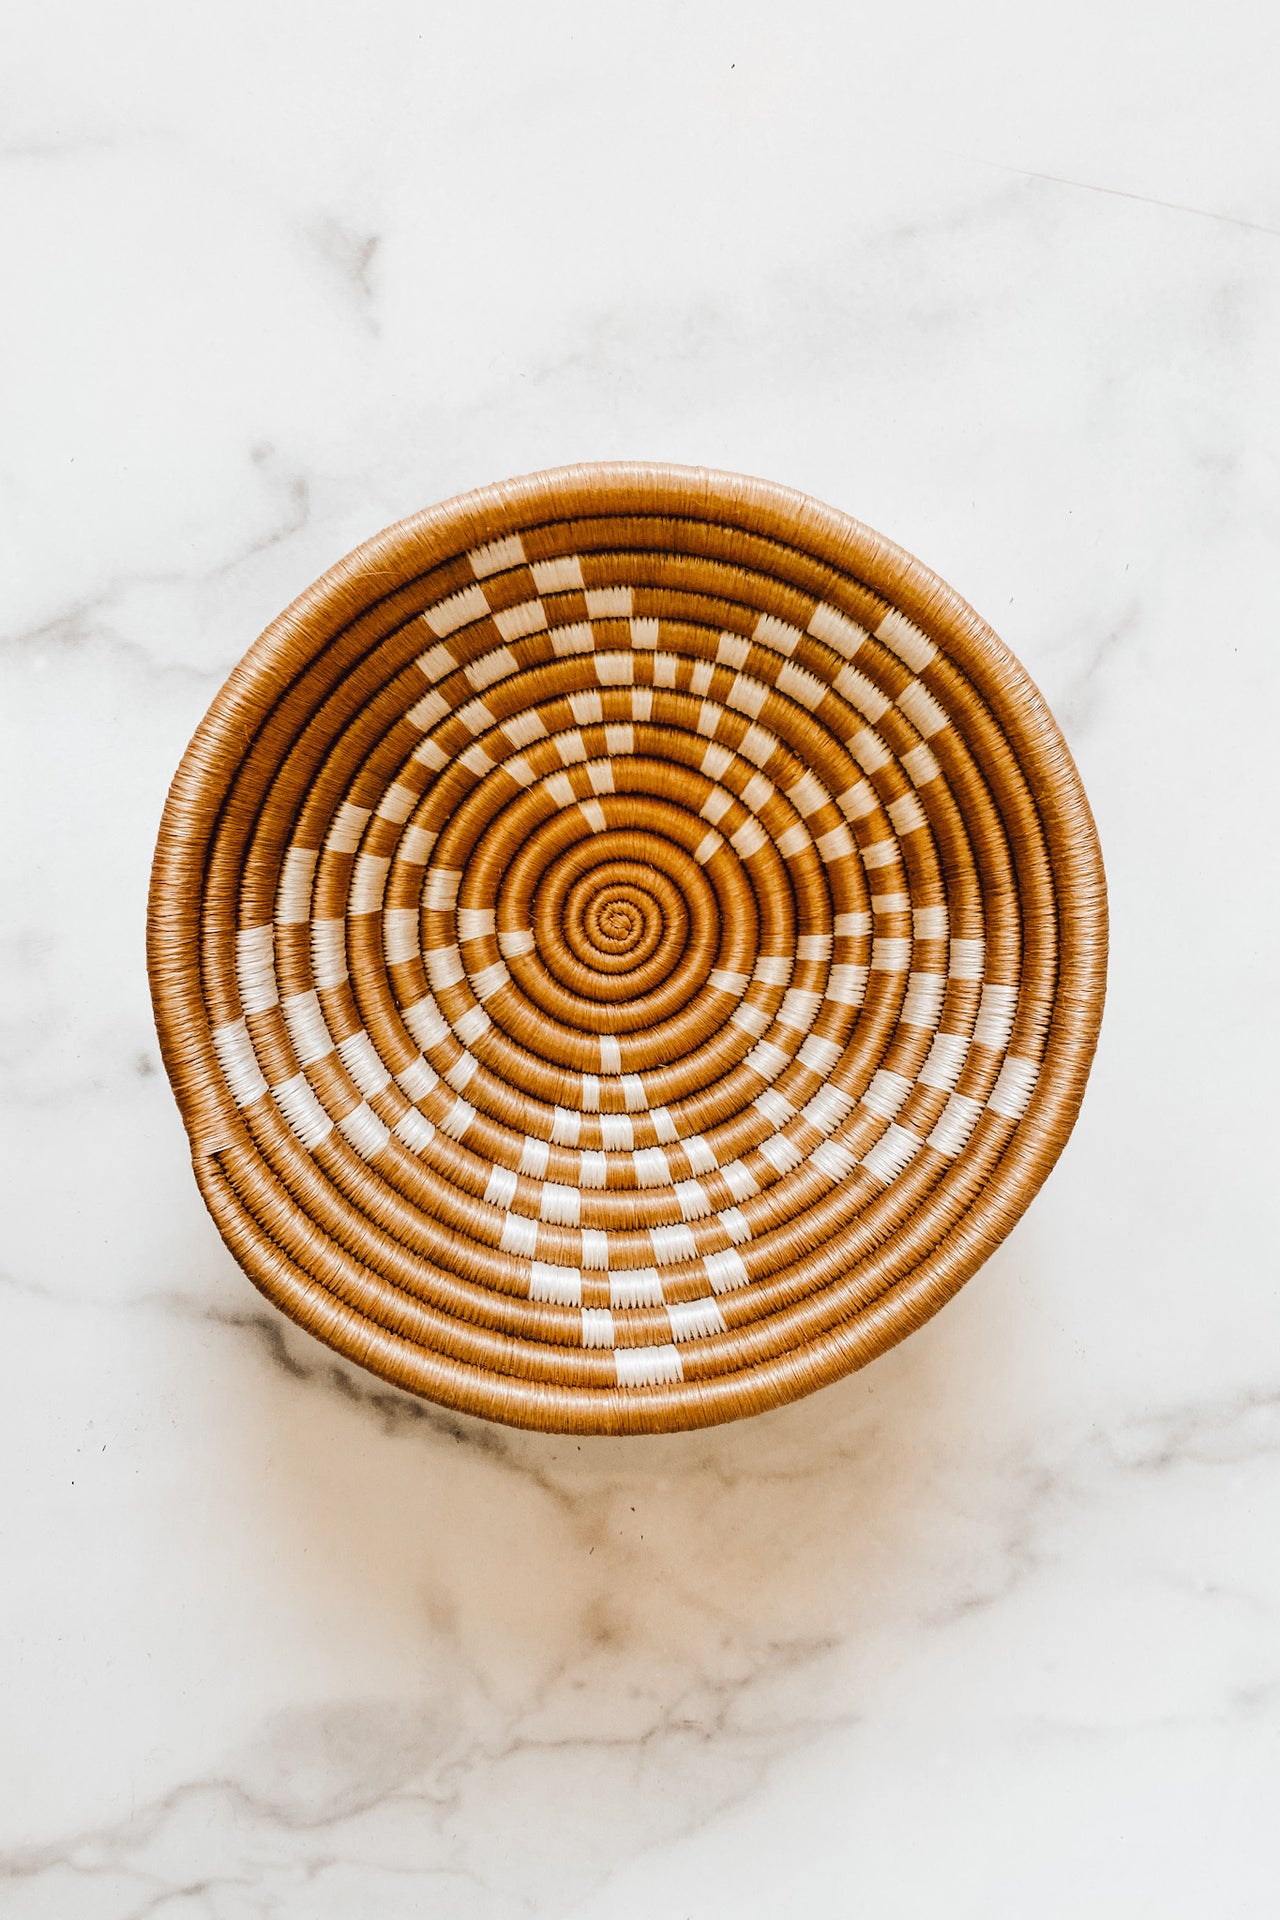 Constellation Woven Bowls